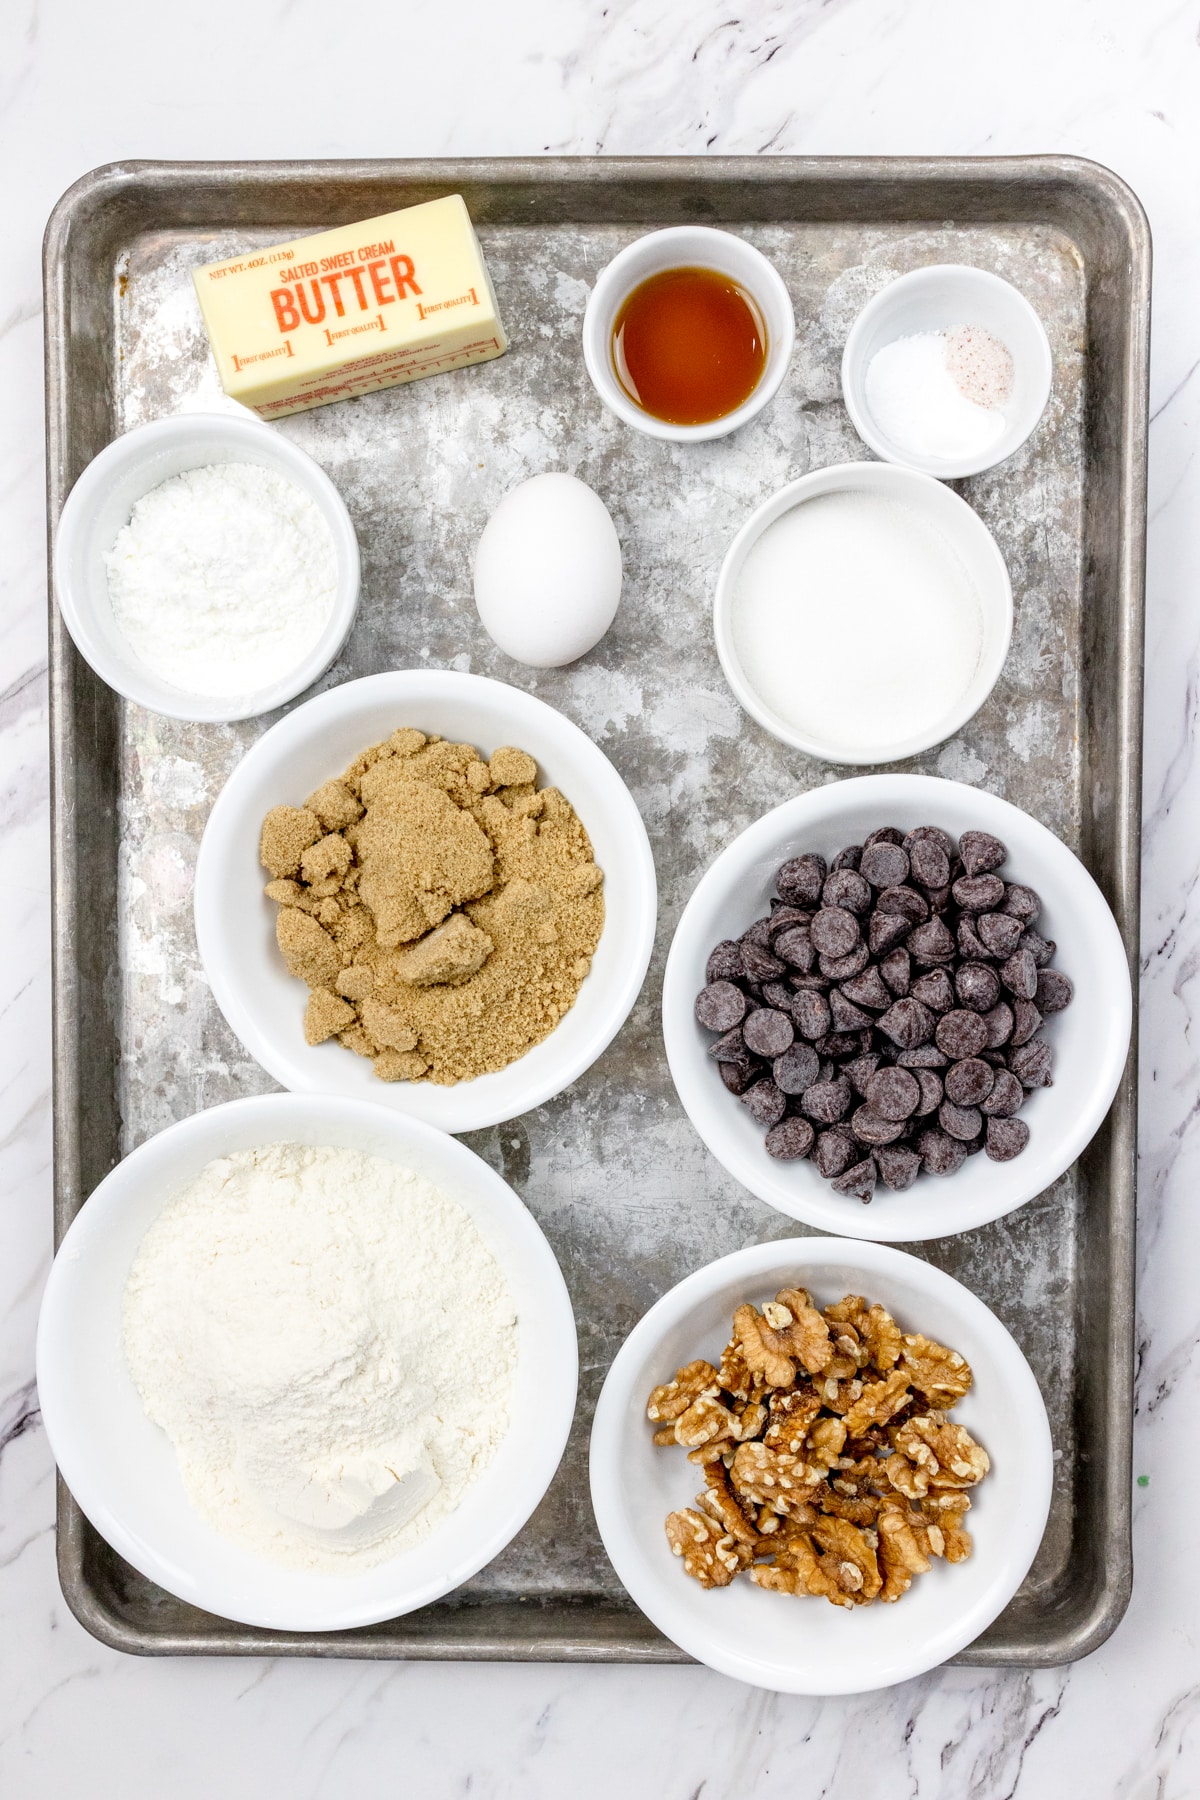 Top view of ingredients needed to make Chocolate Chip Walnut Cookies in small bowls on a baking tray.